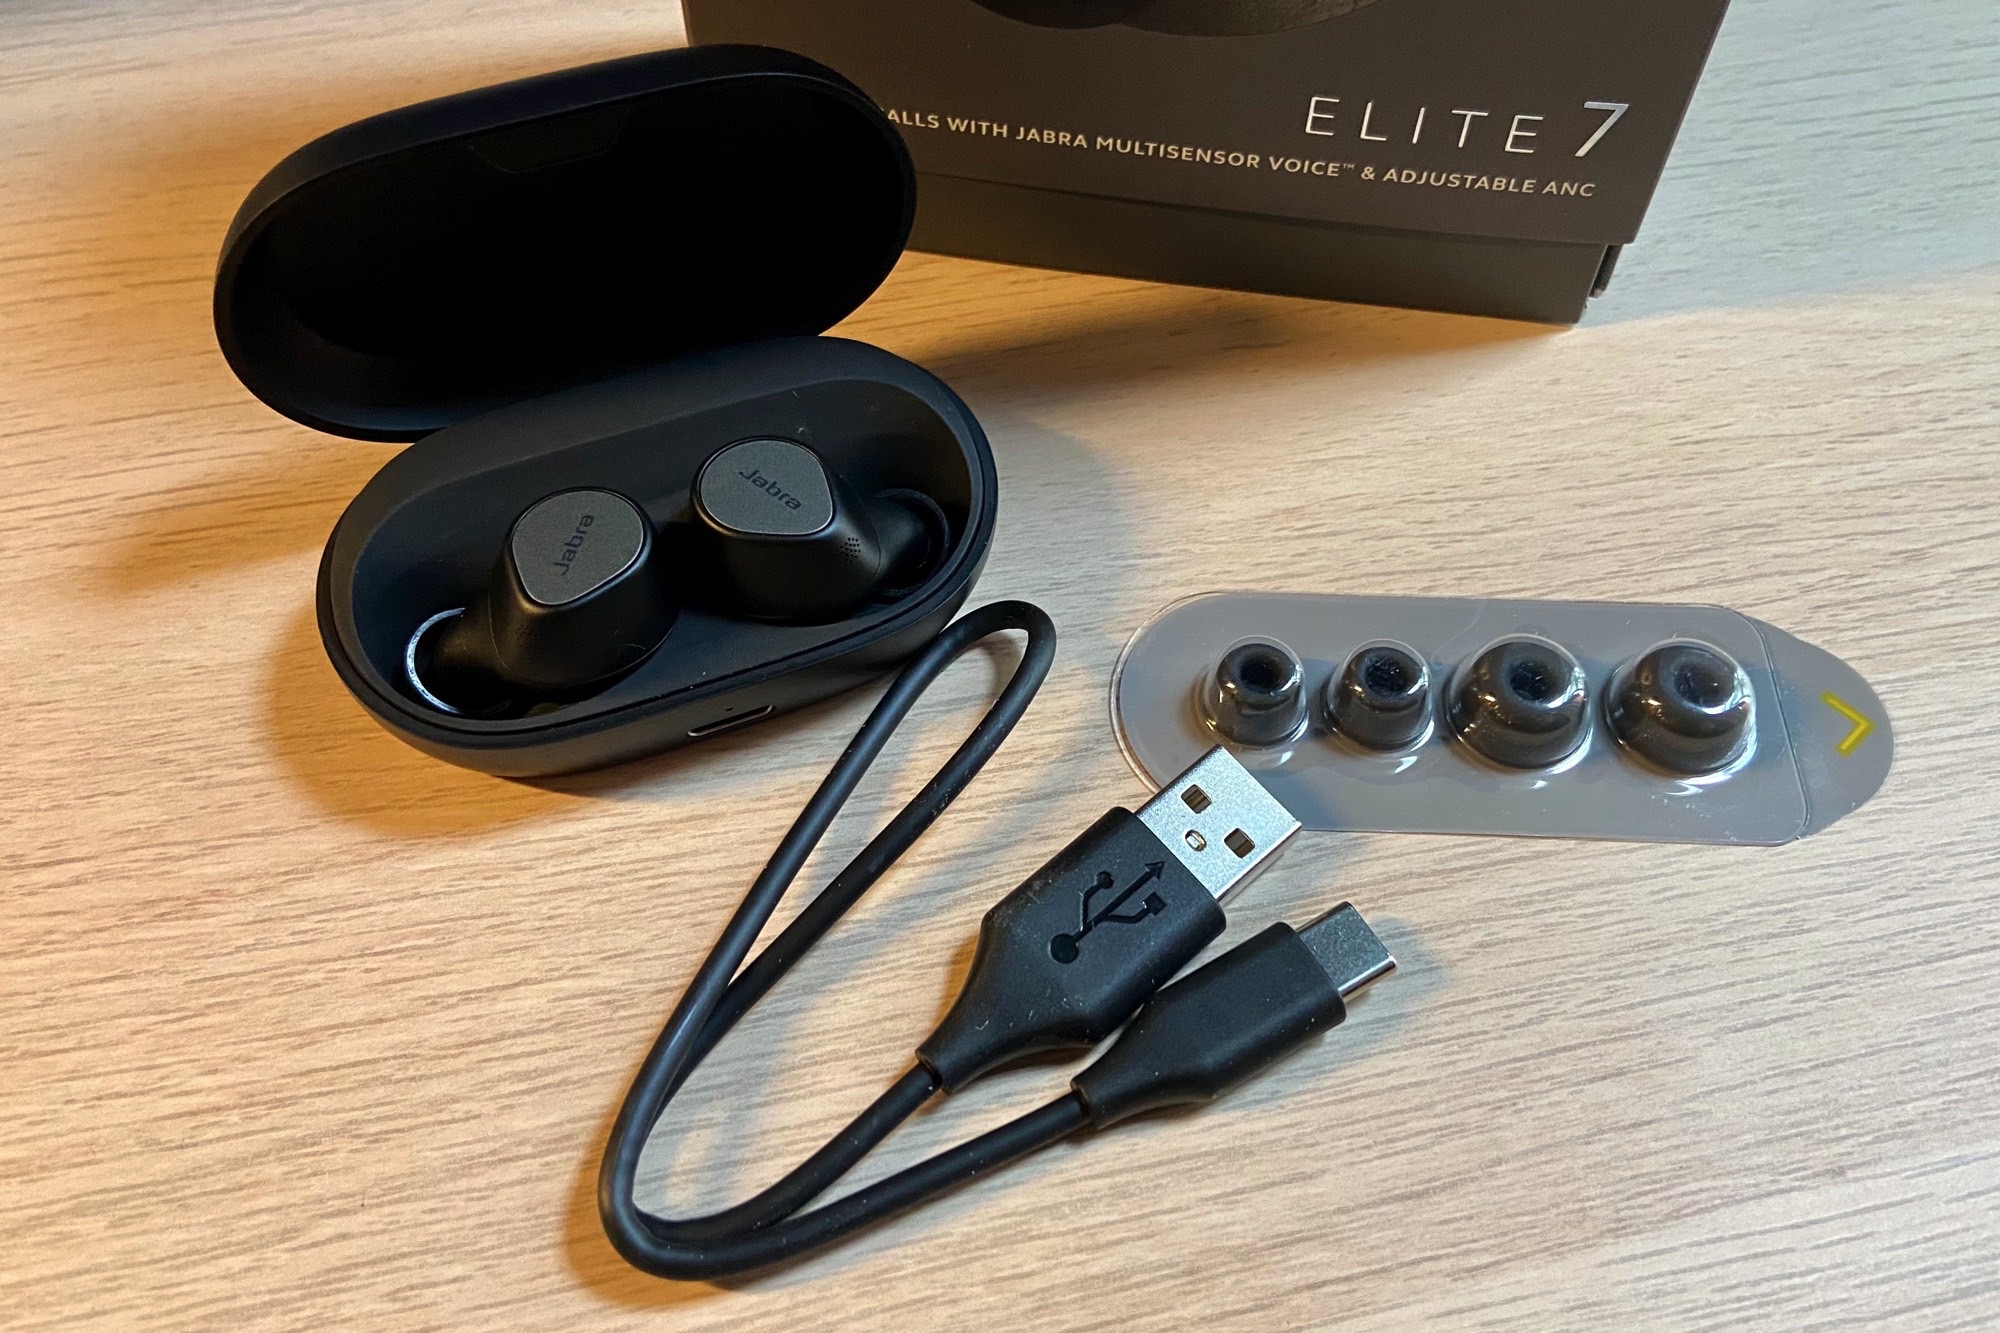 Jabra Elite 7 Pro review: Buy for outstanding phone calls, not for ANC